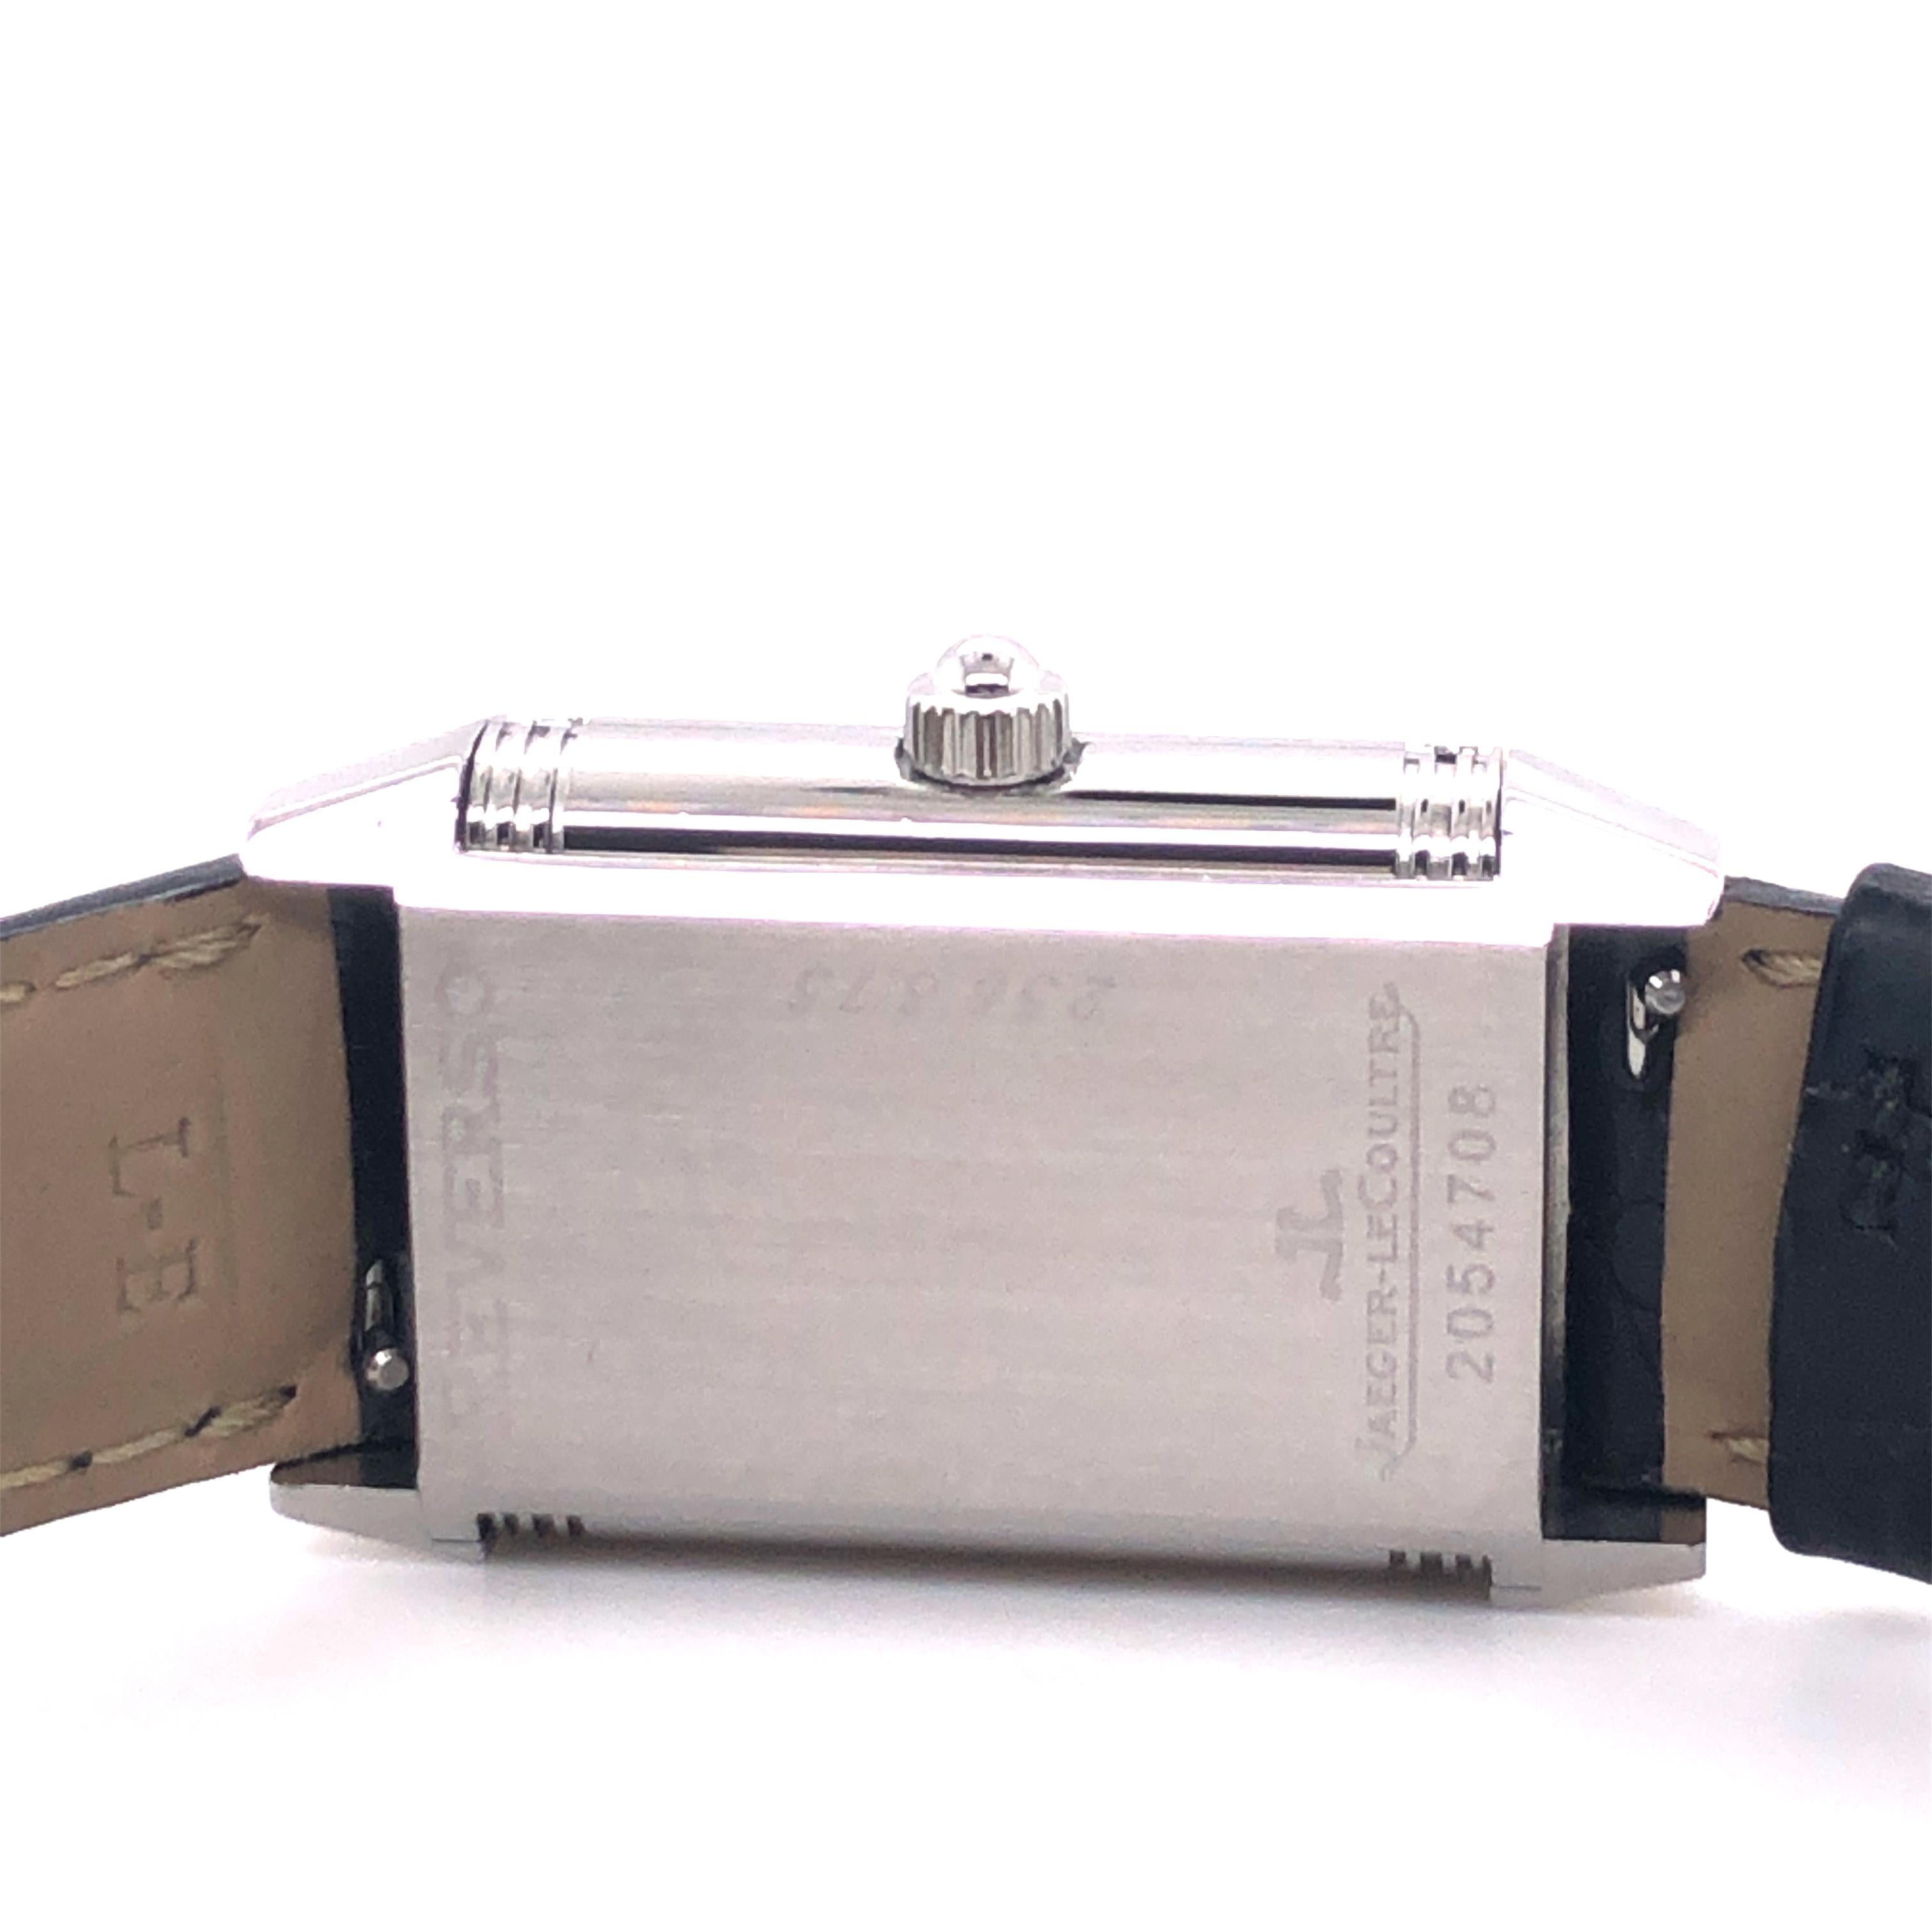 Modern Jaeger-LeCoultre Reverso-Duetto Ladies Watch in Stainless Steel